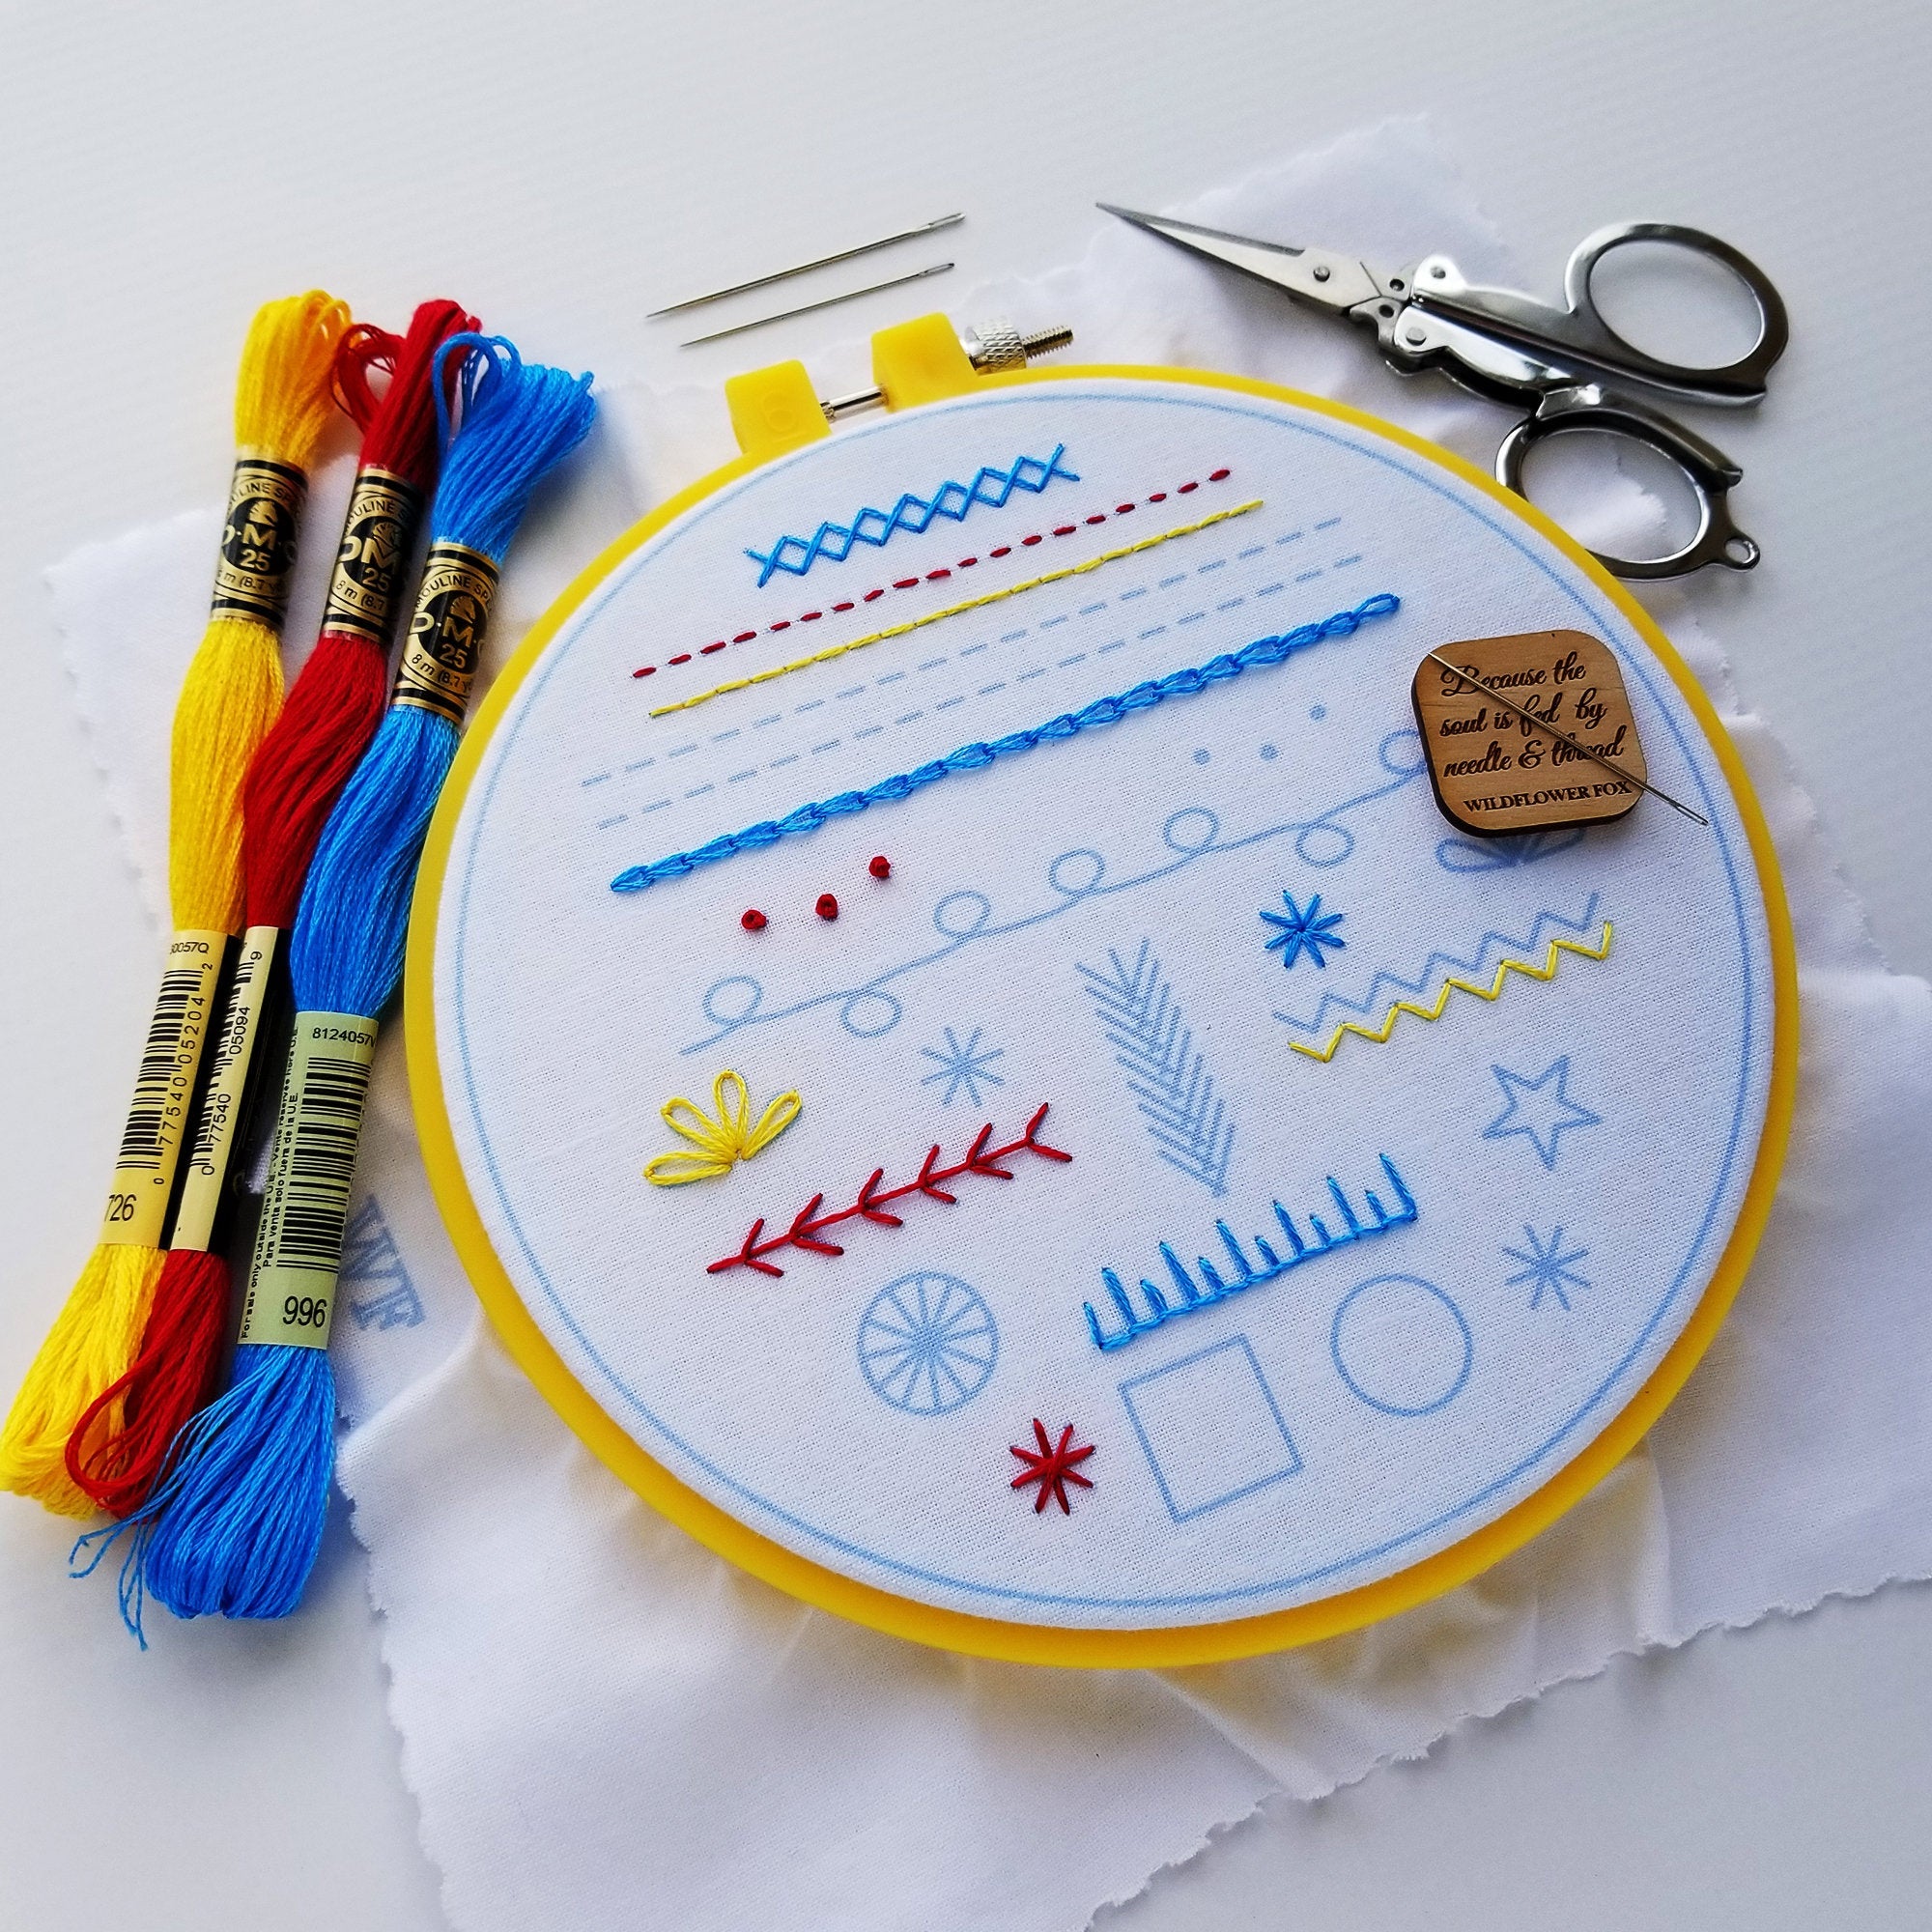 Fabric for Embroidery: The Beginner's Guide